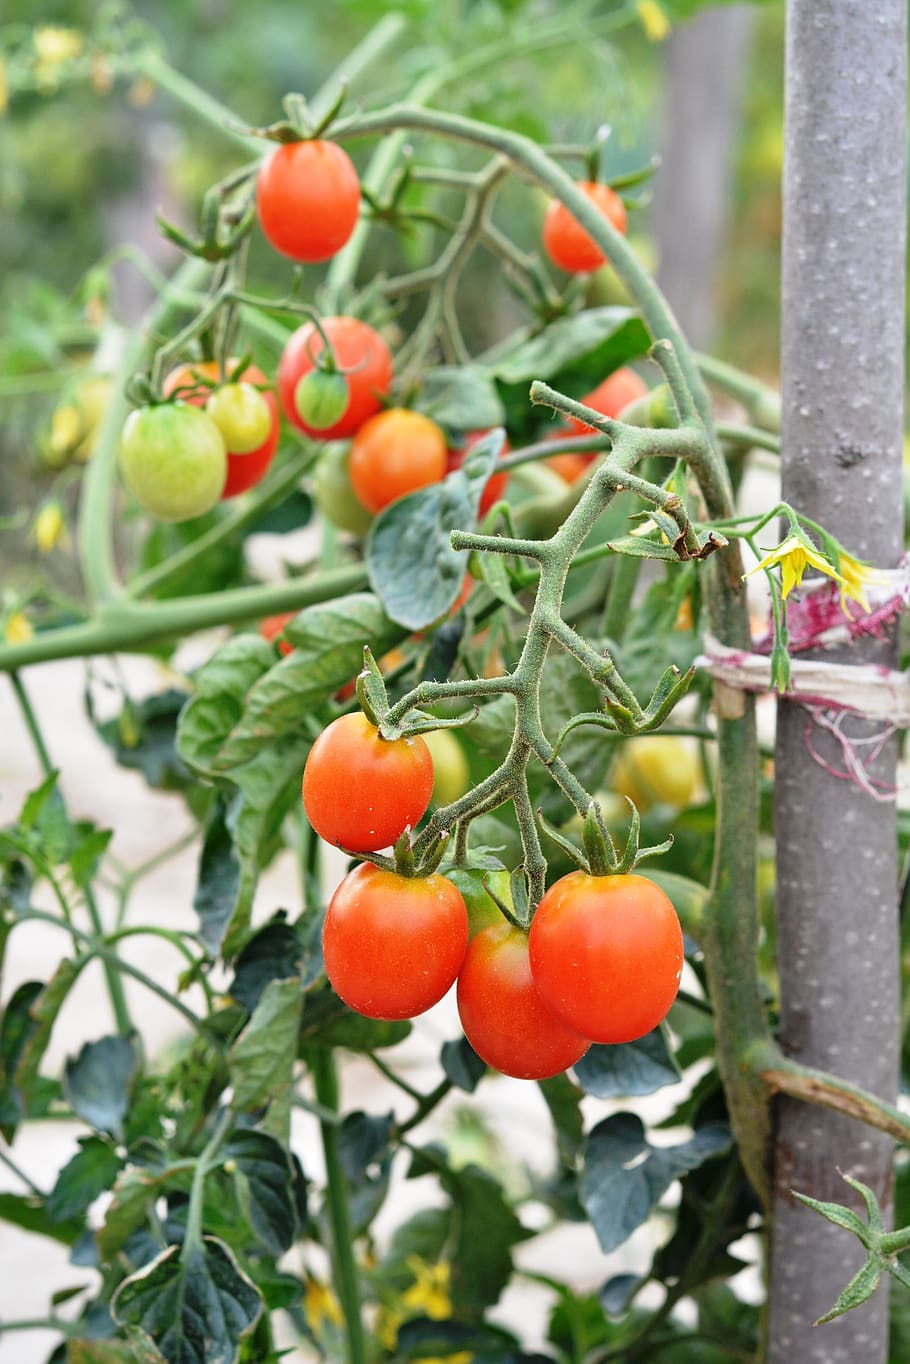 tomato, tomatoes, cherry tomatoes, vegetables, eating, a vegetable, plant, red, tomato red, bush